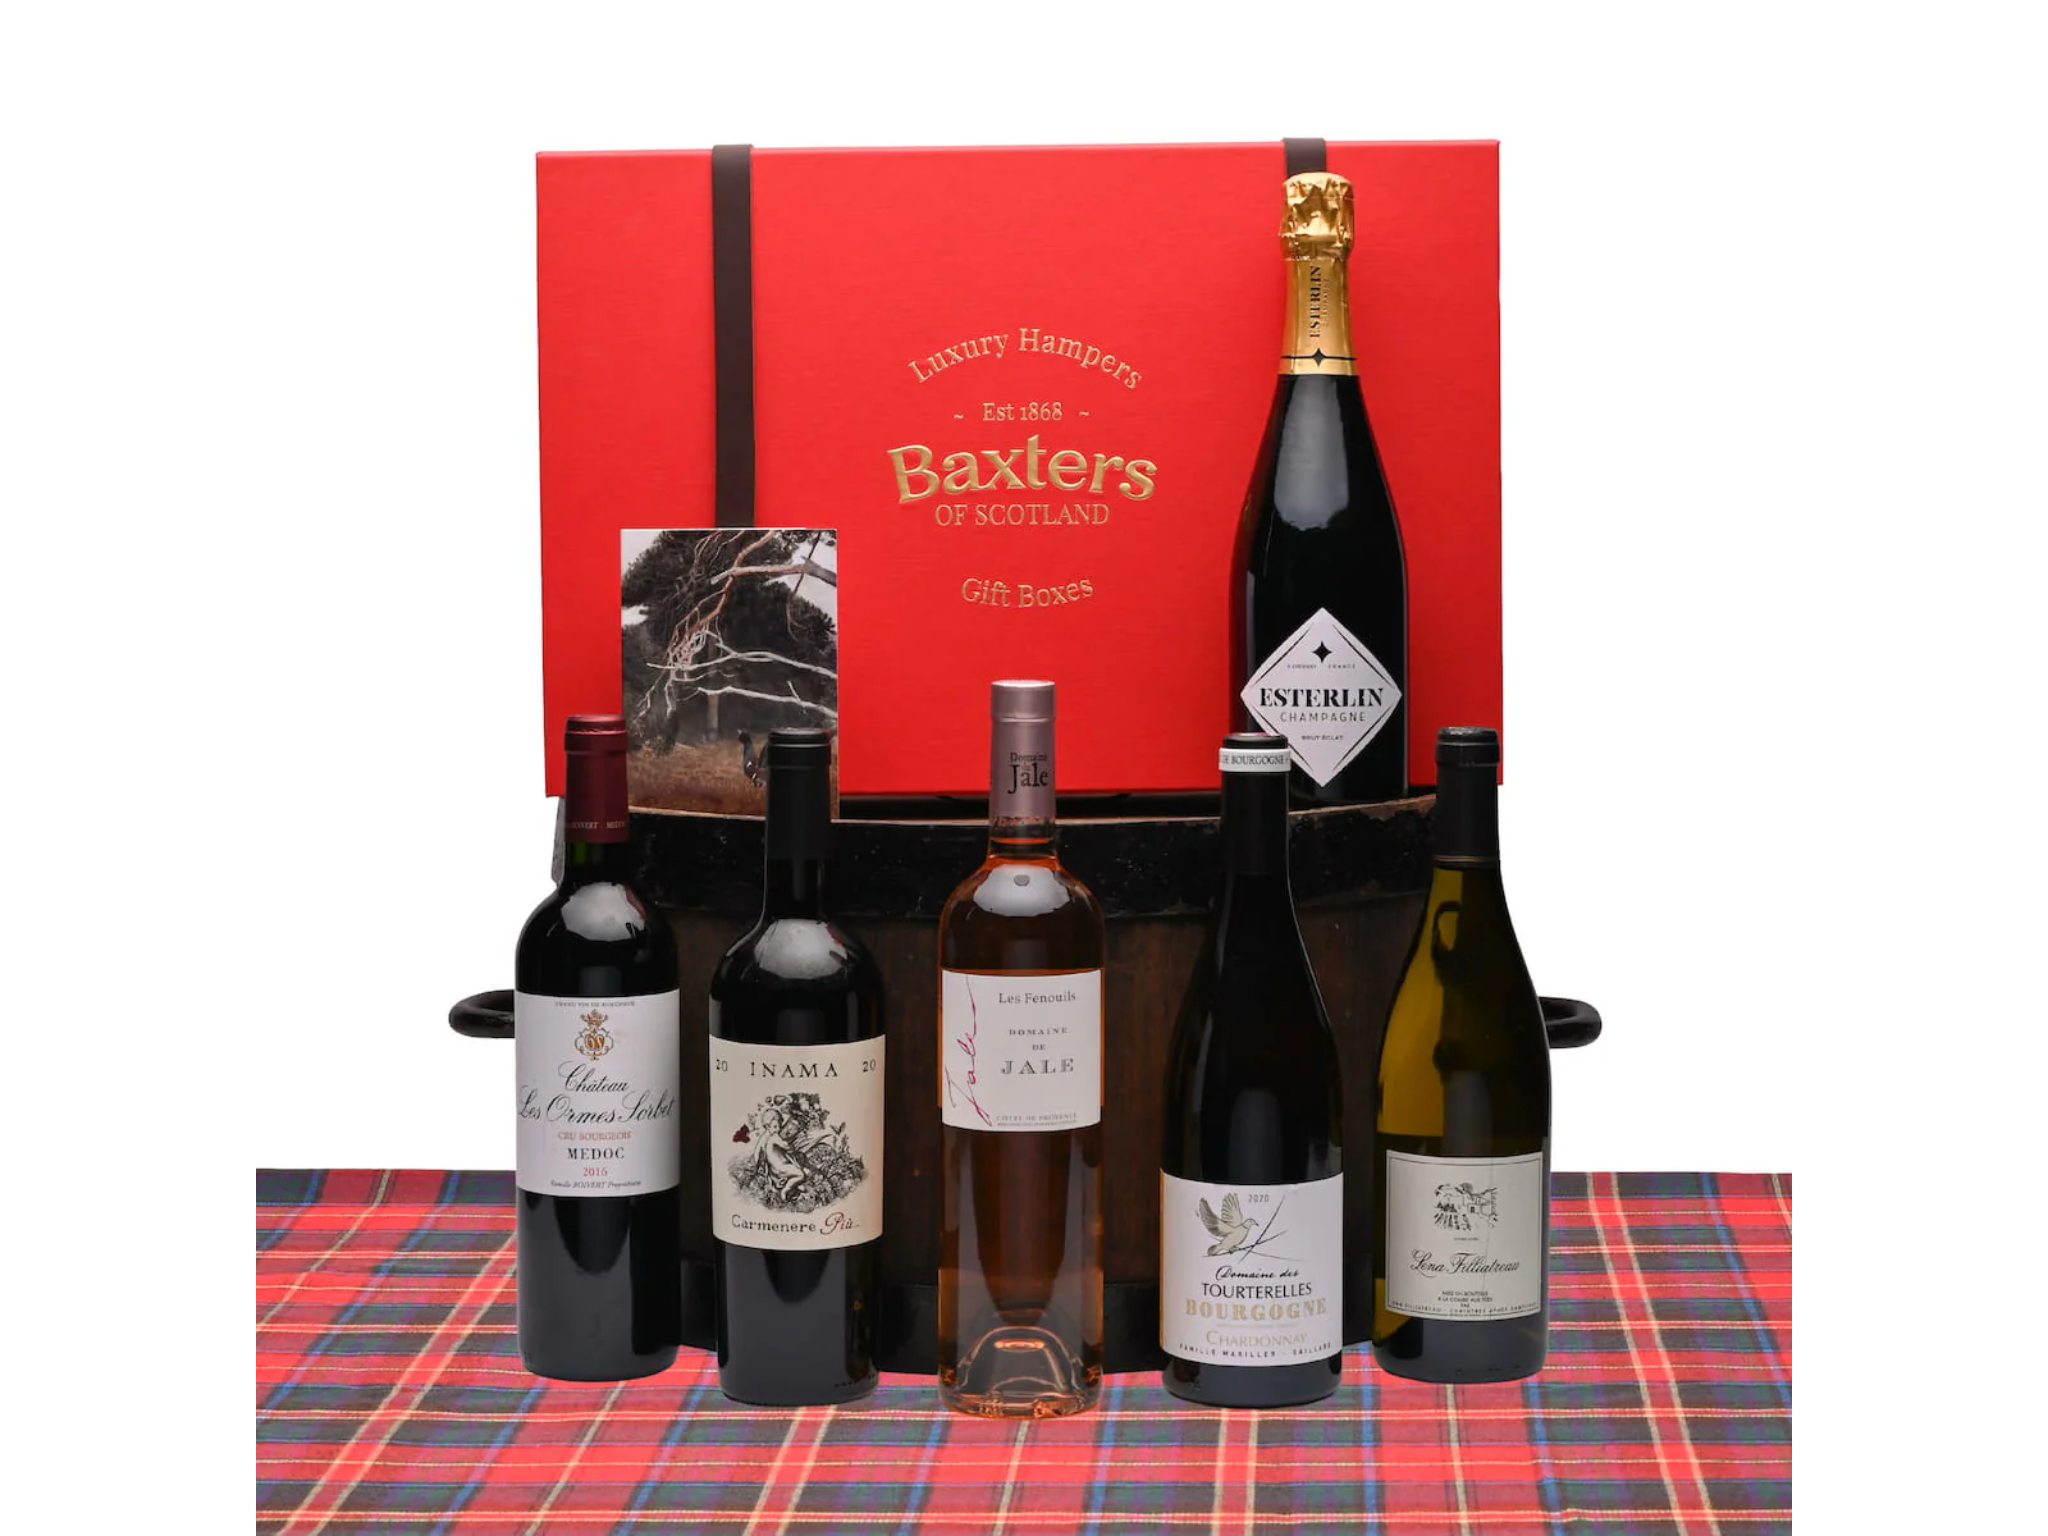 Baxters of Scotland the sommeliers selection hamper